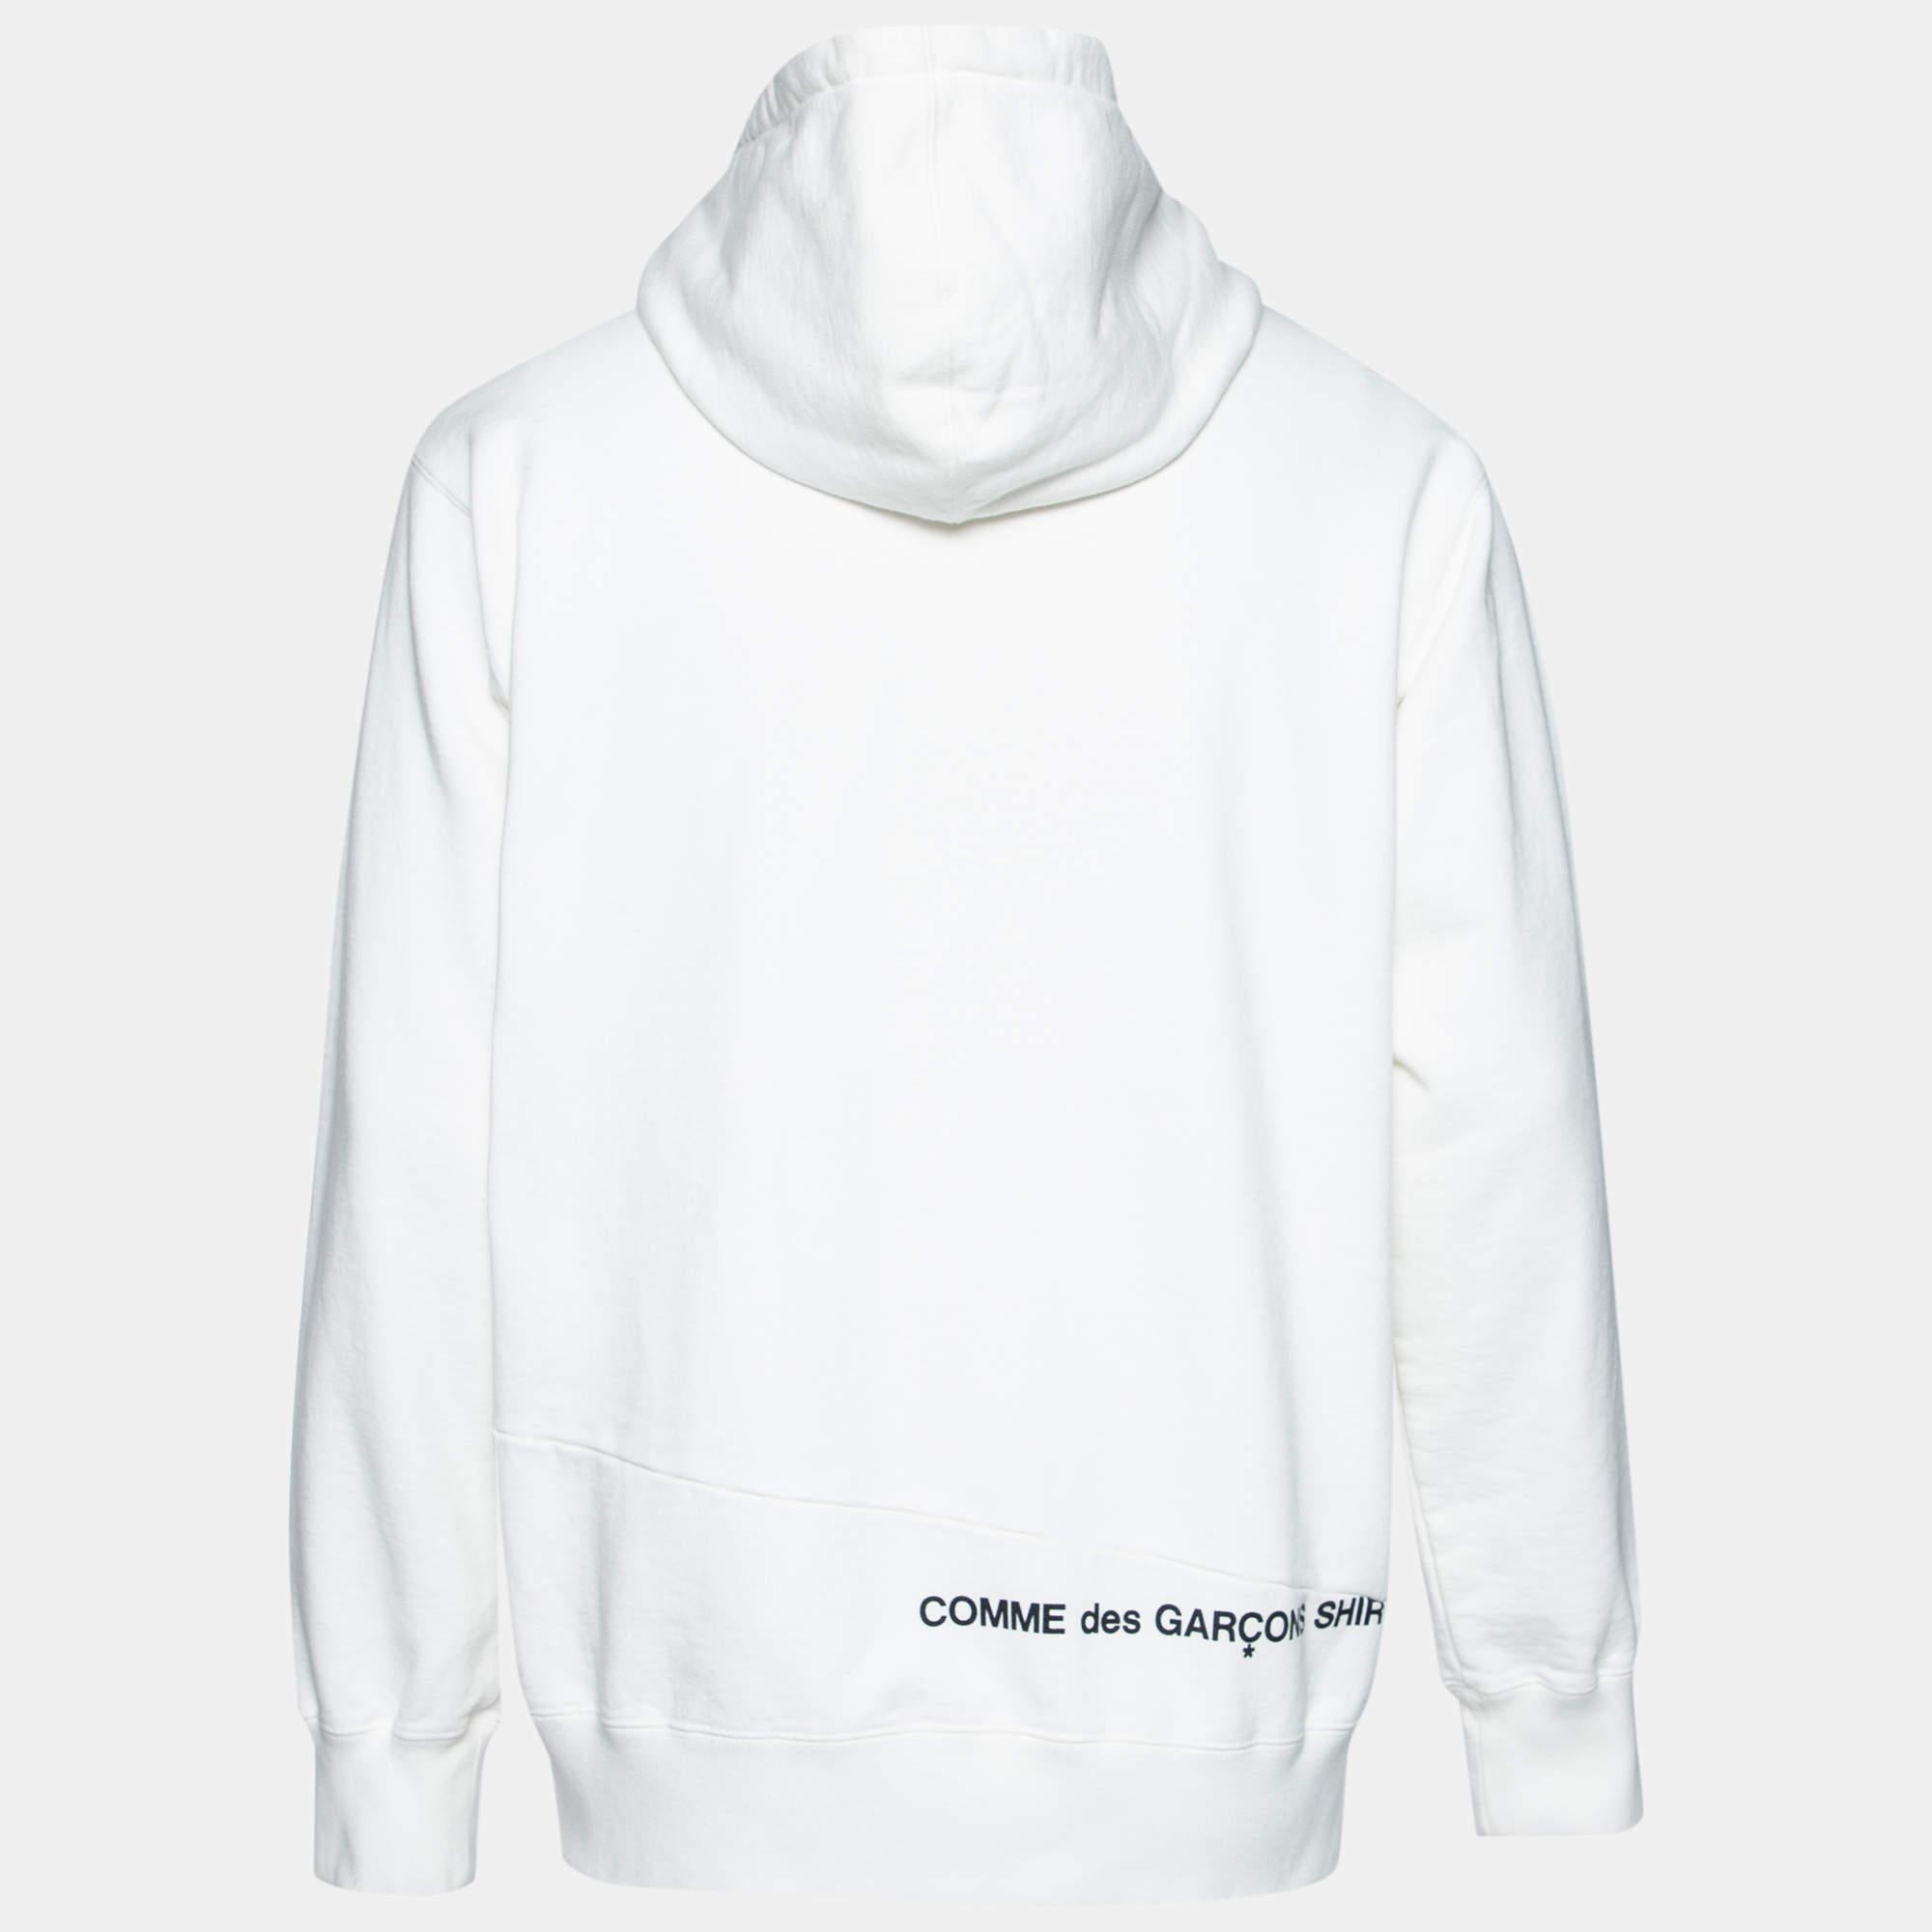 This hoodie from Supreme x Comme des Garçons is great for casual use and will help you stay comfortable. It is made from white terry knit fabric, with split detailed logos elevating its look. It has long sleeves and one pocket. Match this hoodie